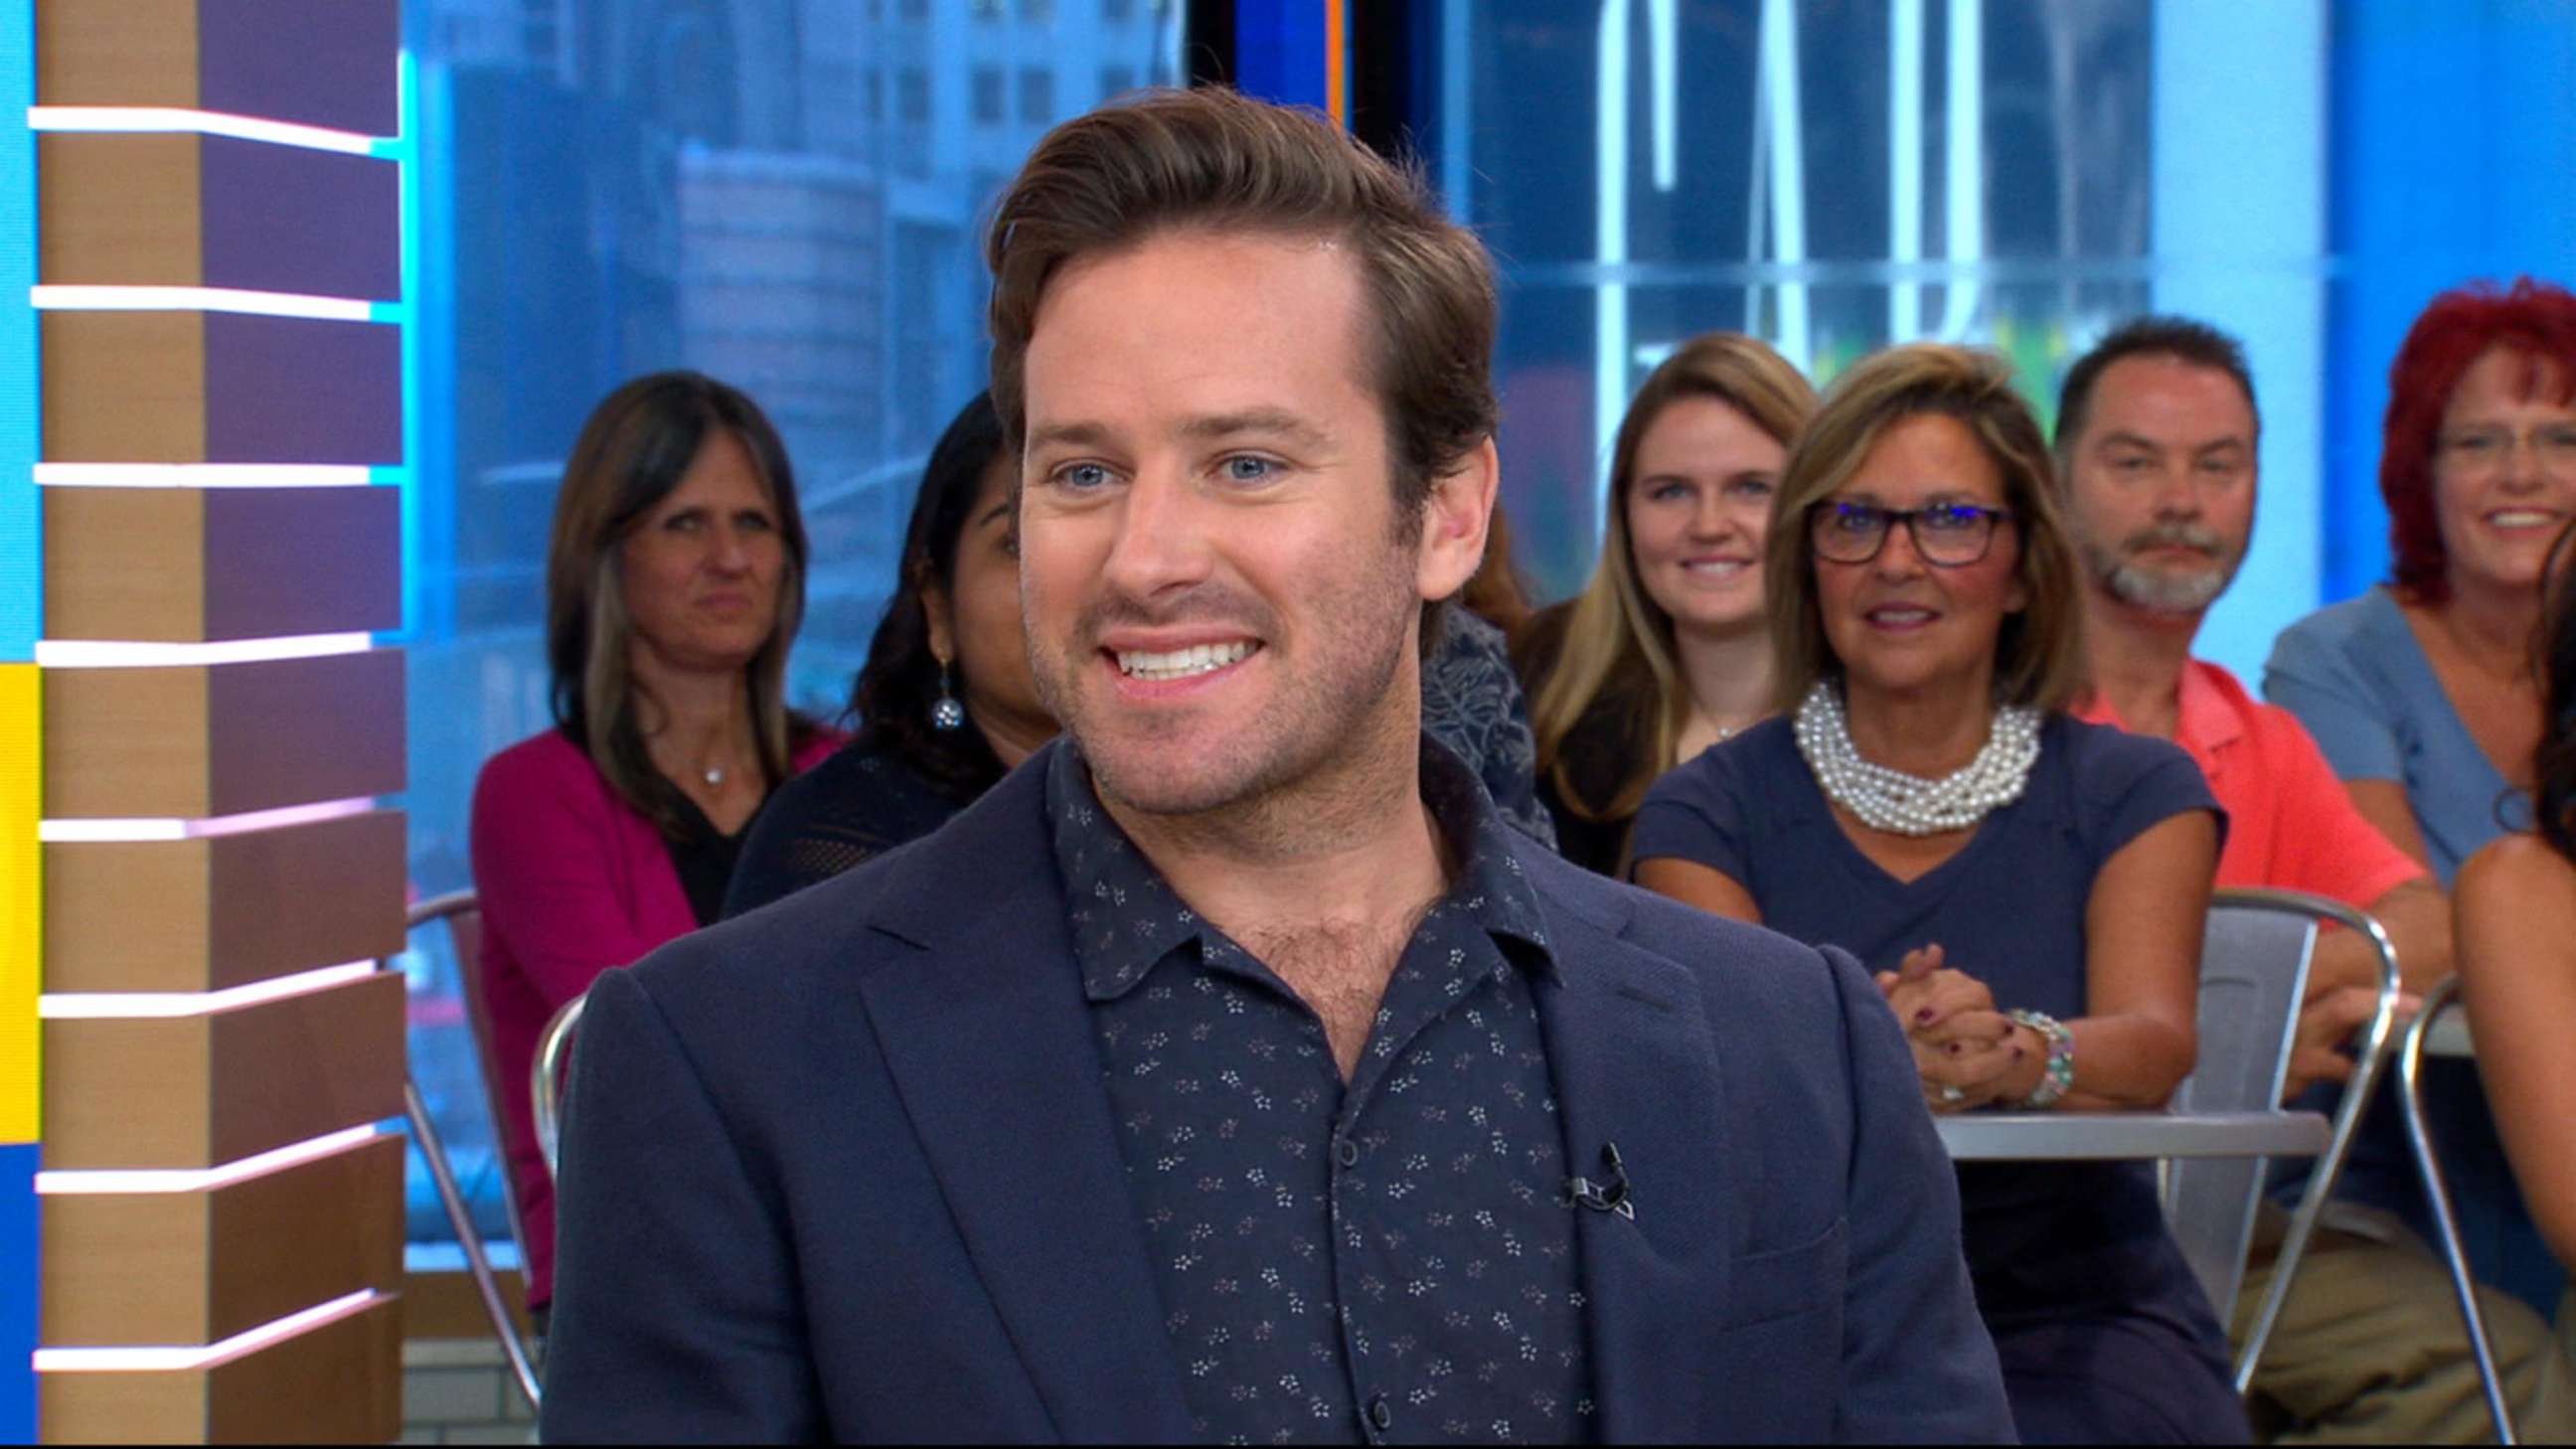 PHOTO: Armie Hammer talks about his latest movie "Sorry to Bother You" on "Good Morning America, July 9, 2018."